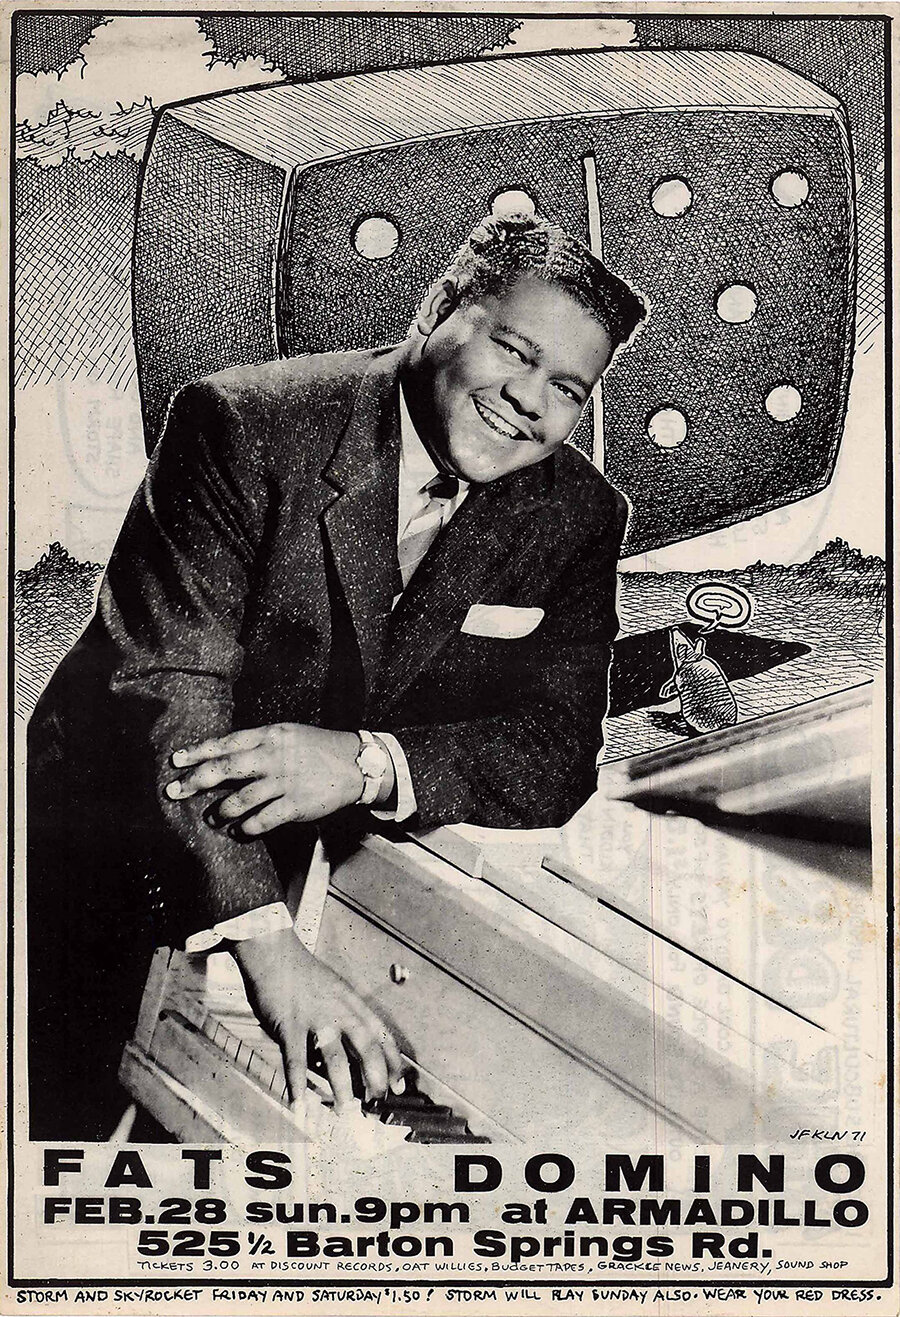 Fats Domino at the Armadillo World Headquarters, February 28, 1971, by Jim Franklin